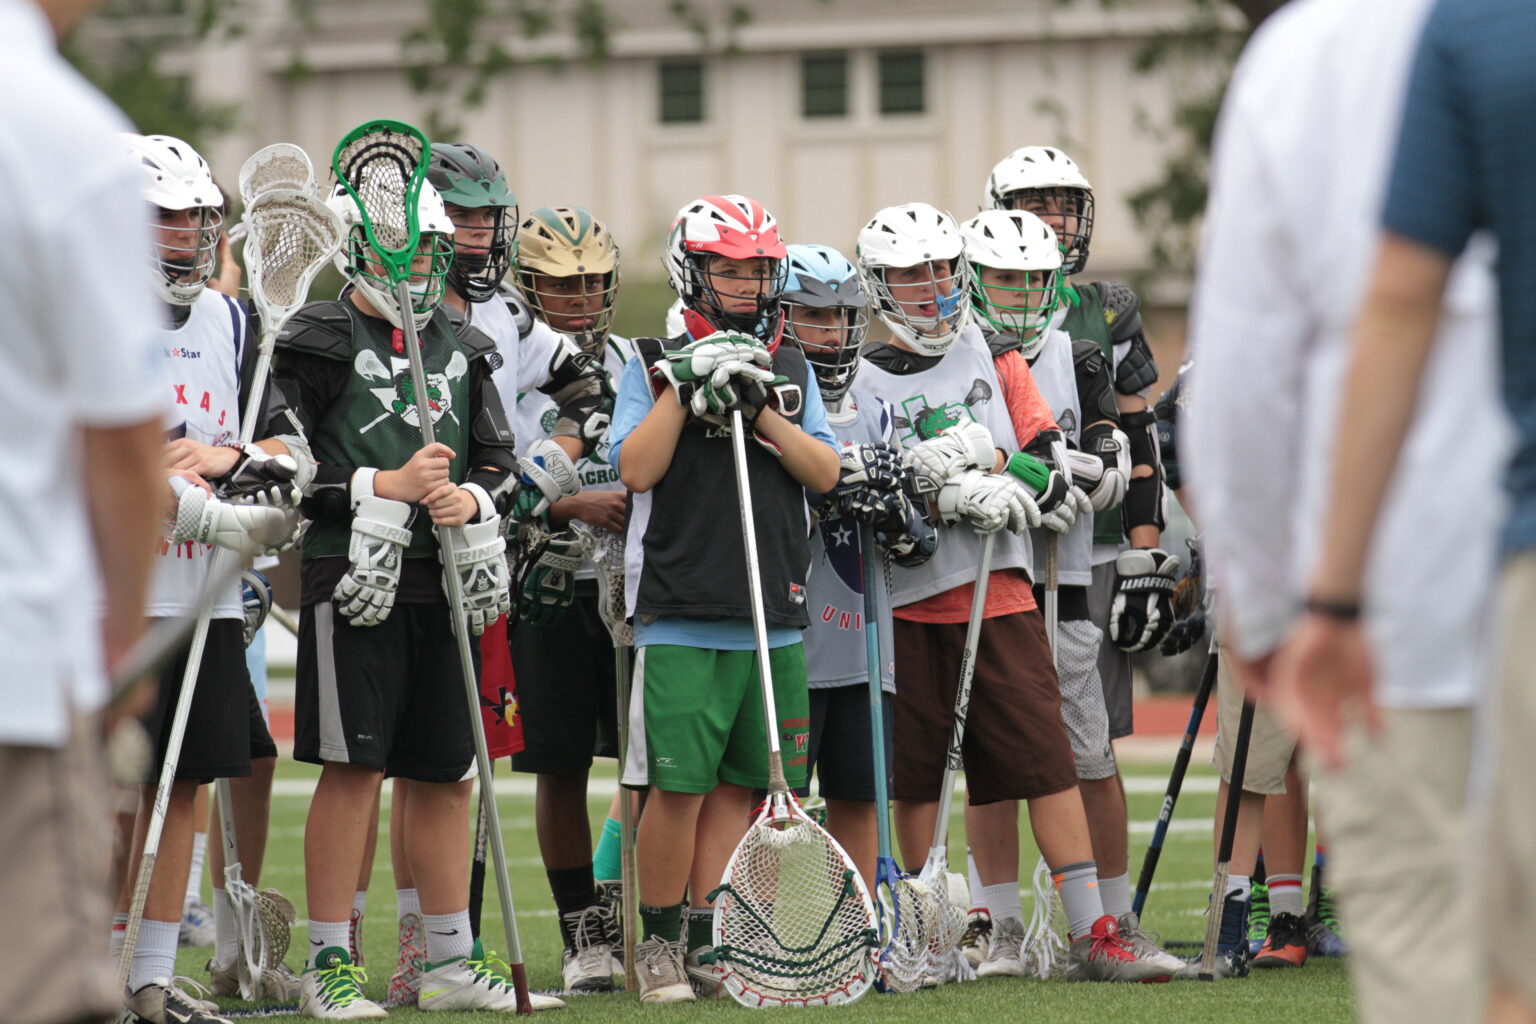 Beginners are the lifeblood of Texas Lacrosse.